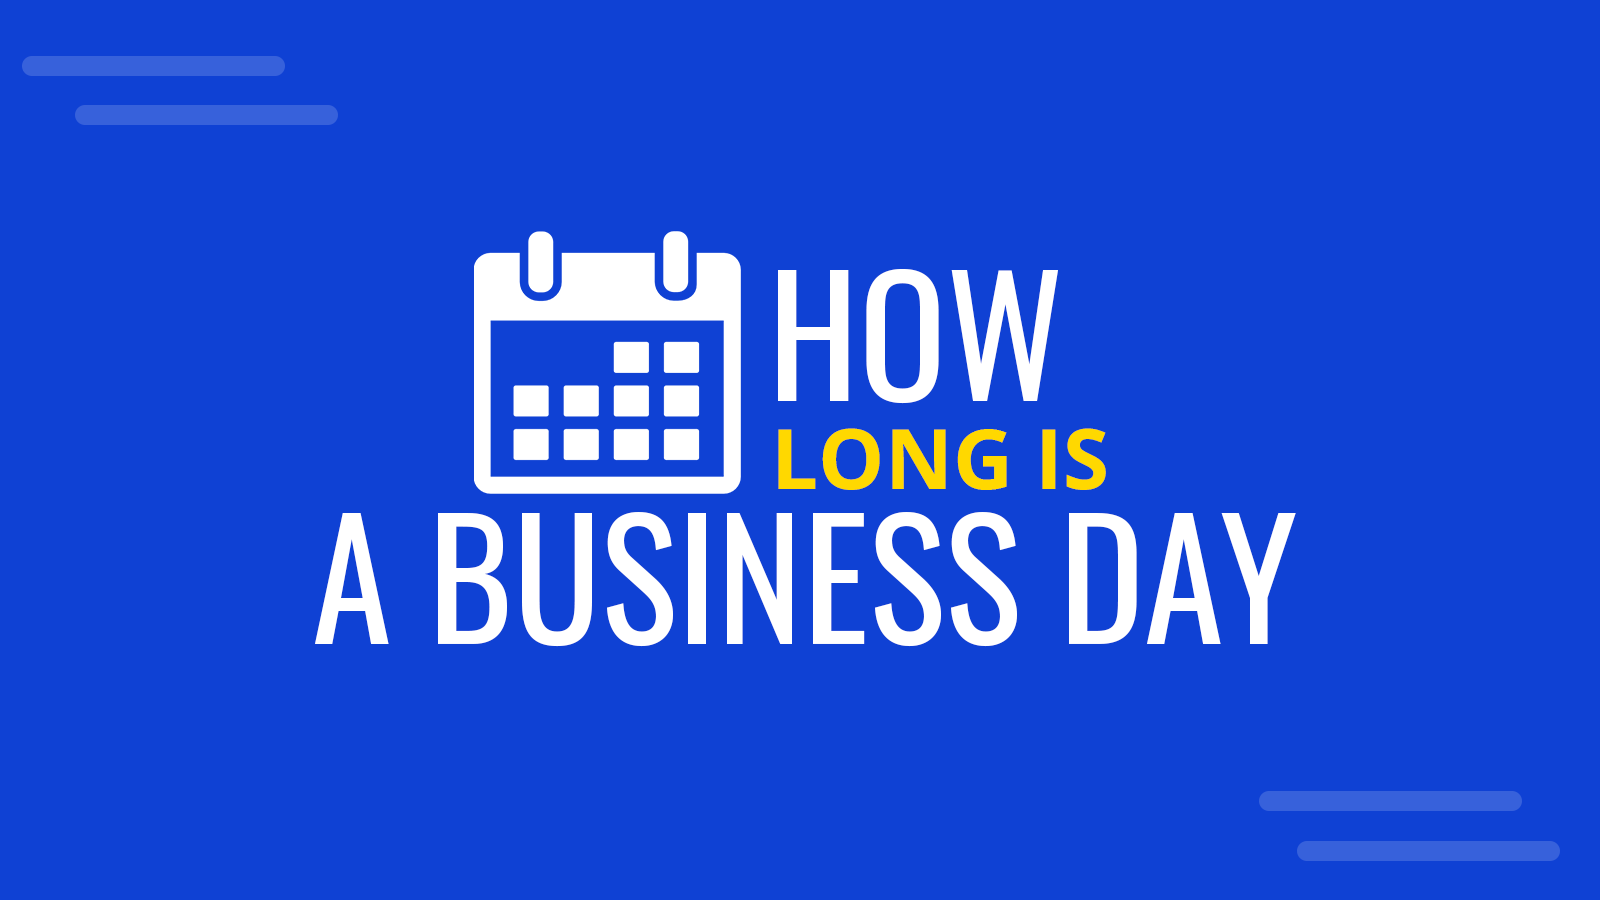 Understanding the Duration of Business Days From One to Five Business Days